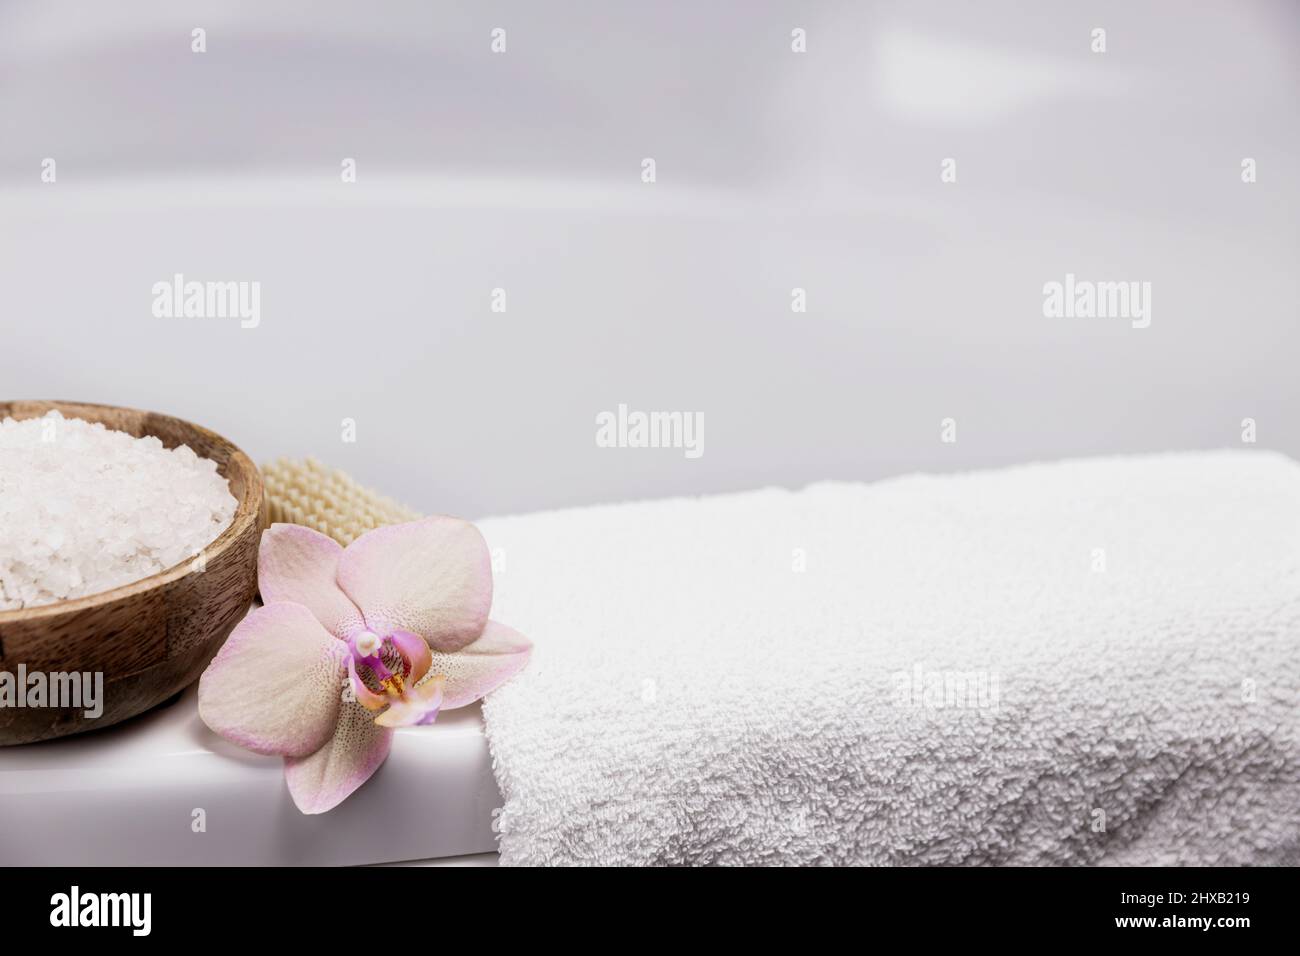 Preparation for hotel spa treatment, home bath procedure. White washbasin in bathroom, accessories on tray. Foot or body brush, white towel, sea salt in bamboo bowl, orchid flower. High quality photo Stock Photo